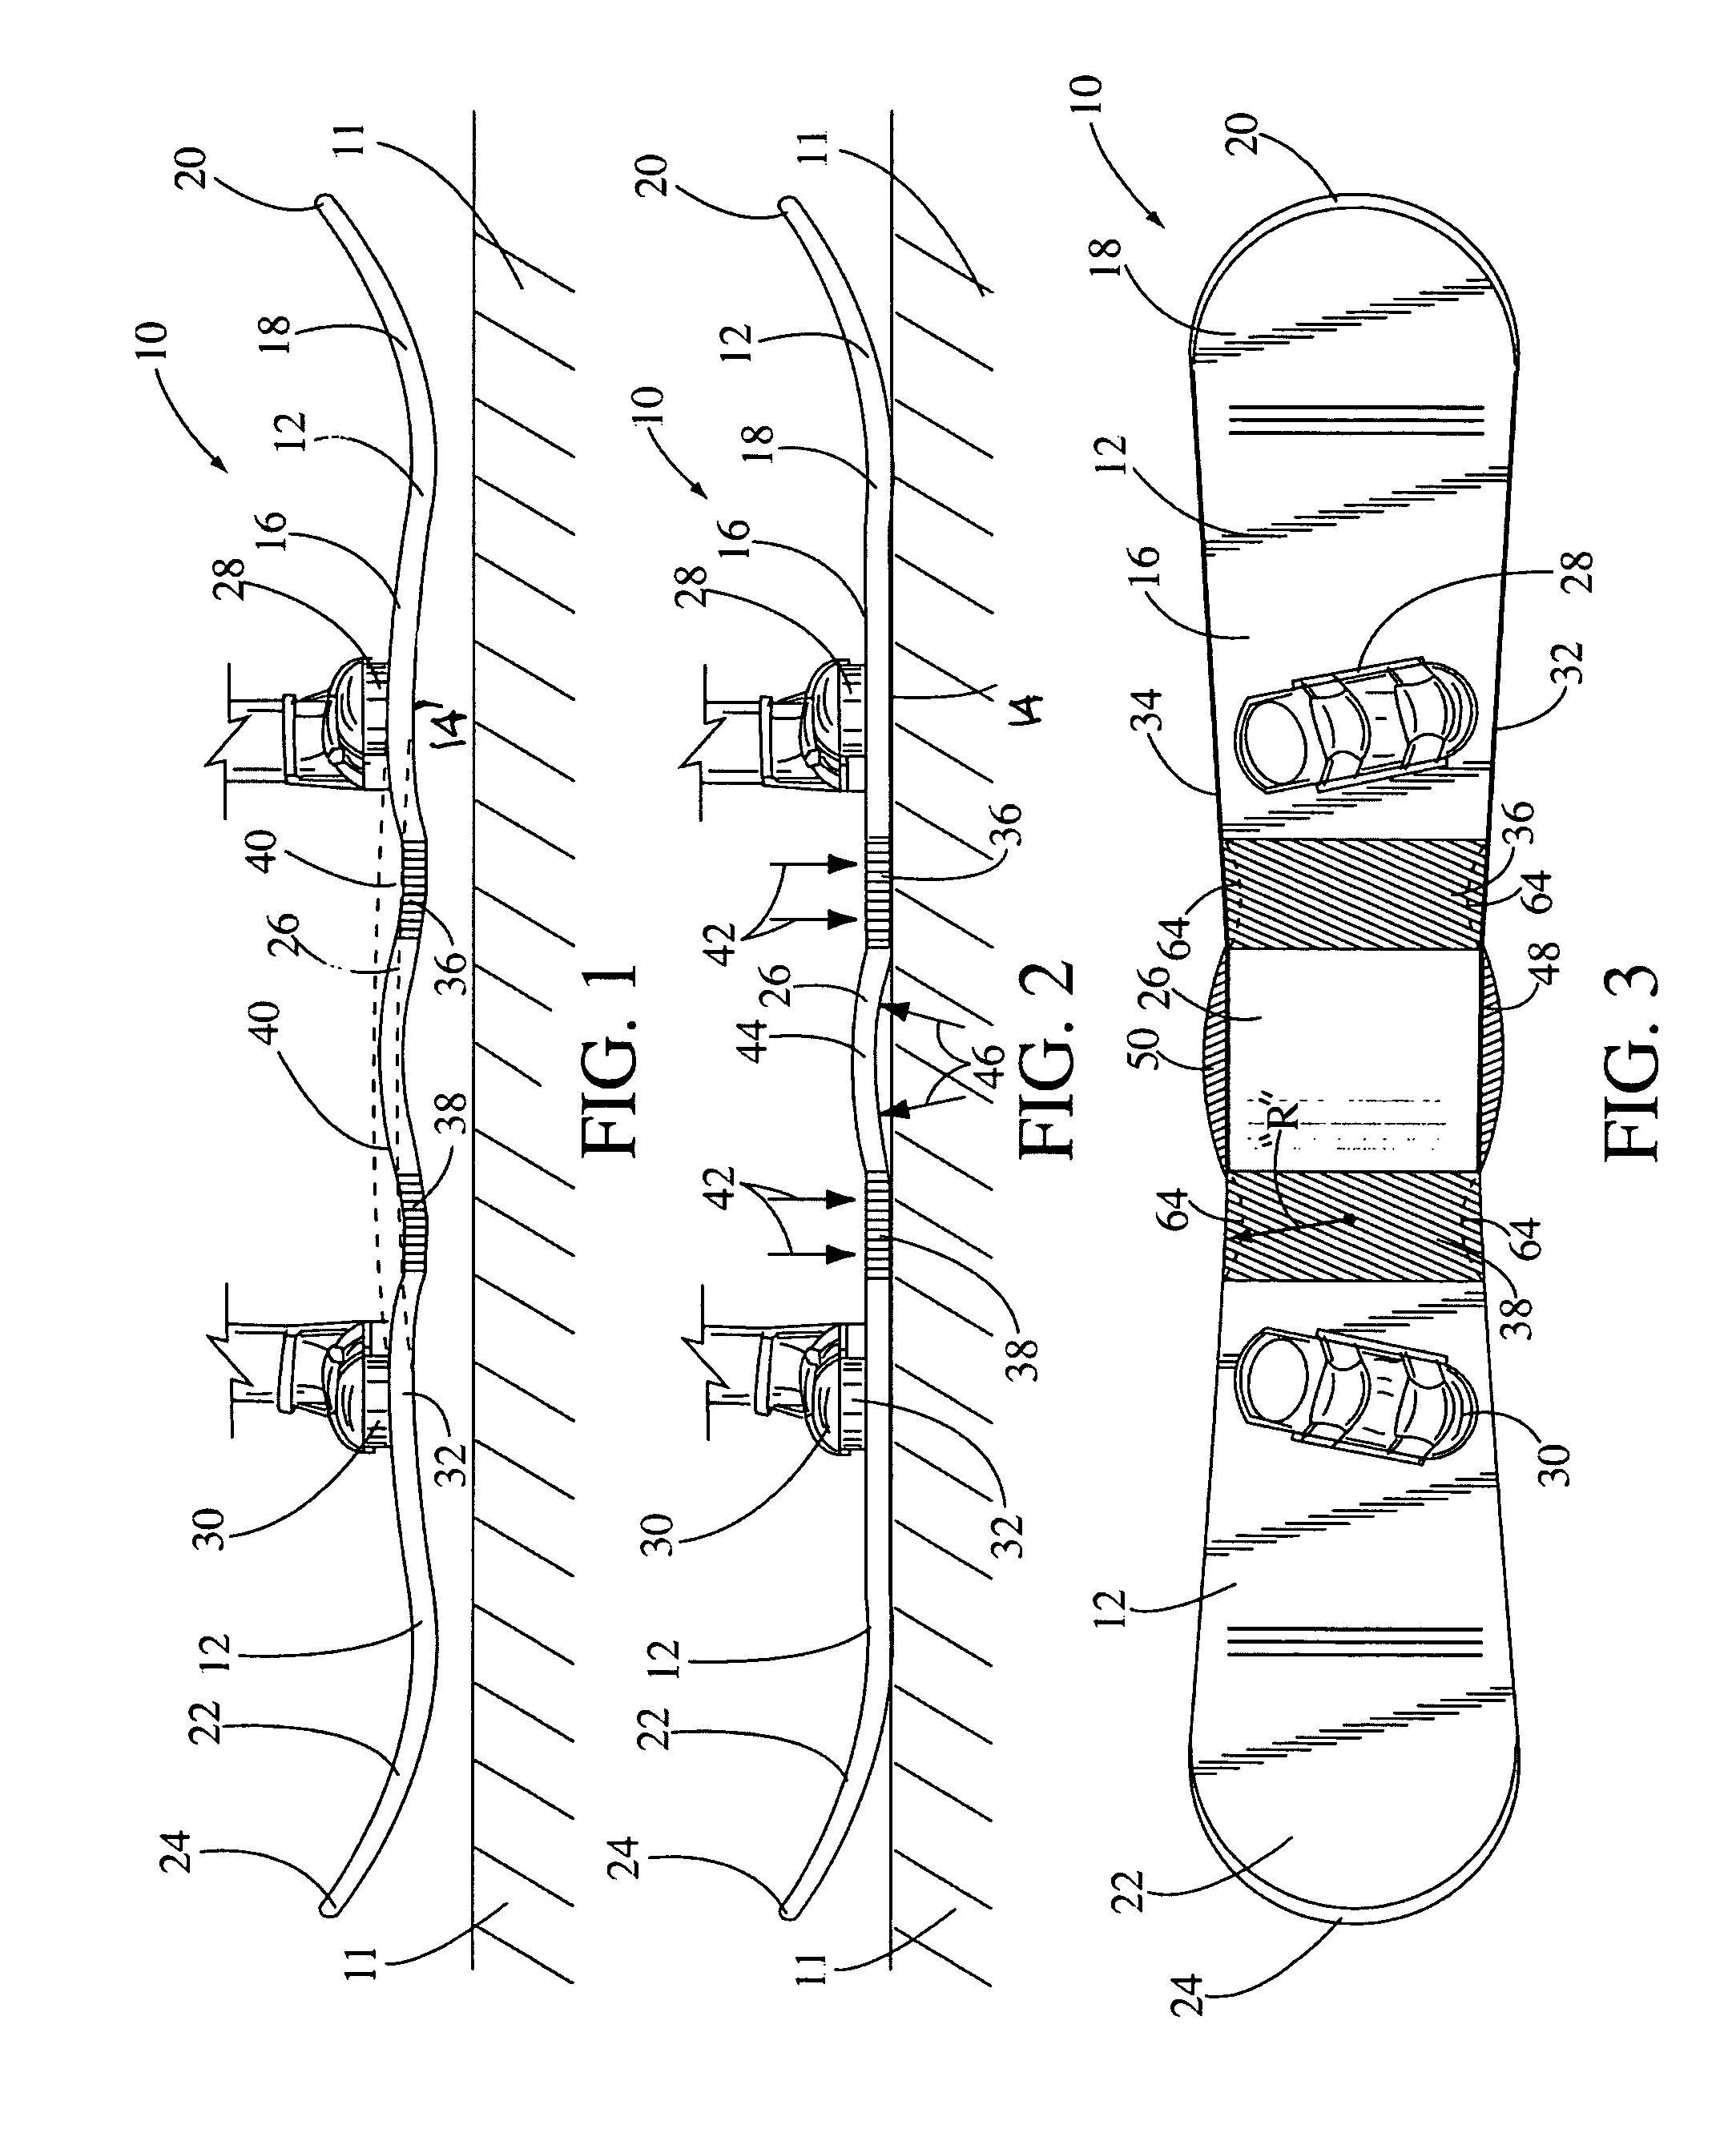 Bi-directional snowboard with parallel reverse cambers for reduced snow contact and with traction planes for increased edge control